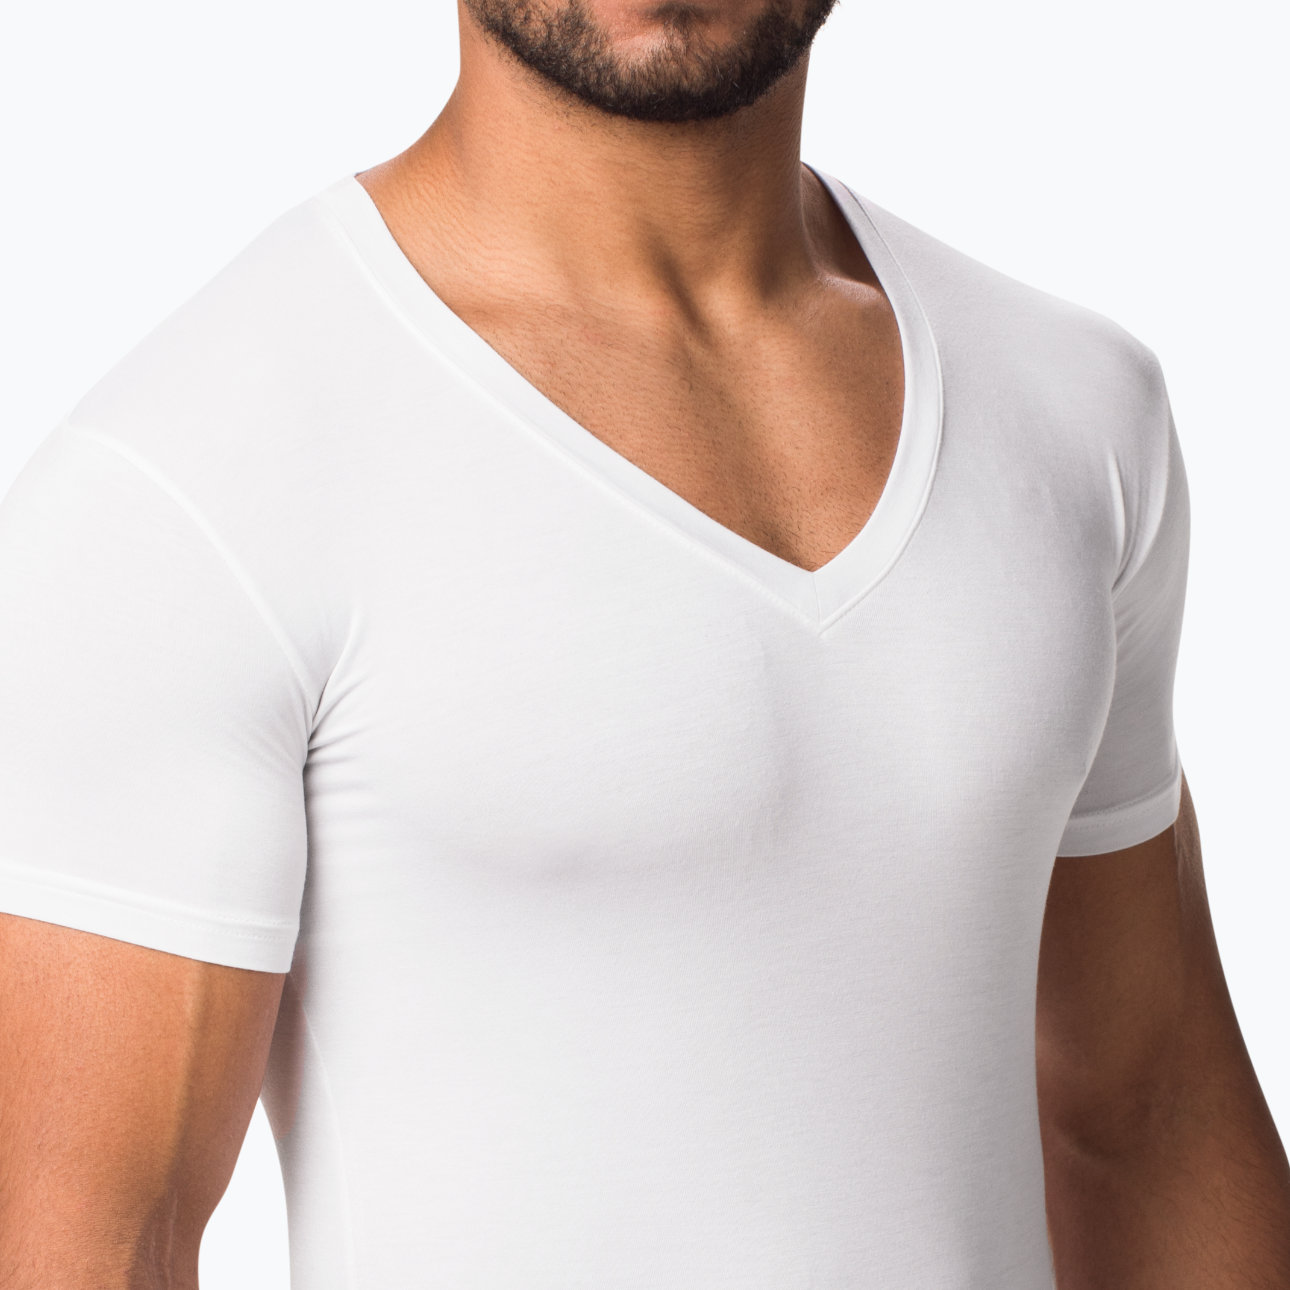 When & Why You Should You Wear an Undershirt // UnderFit